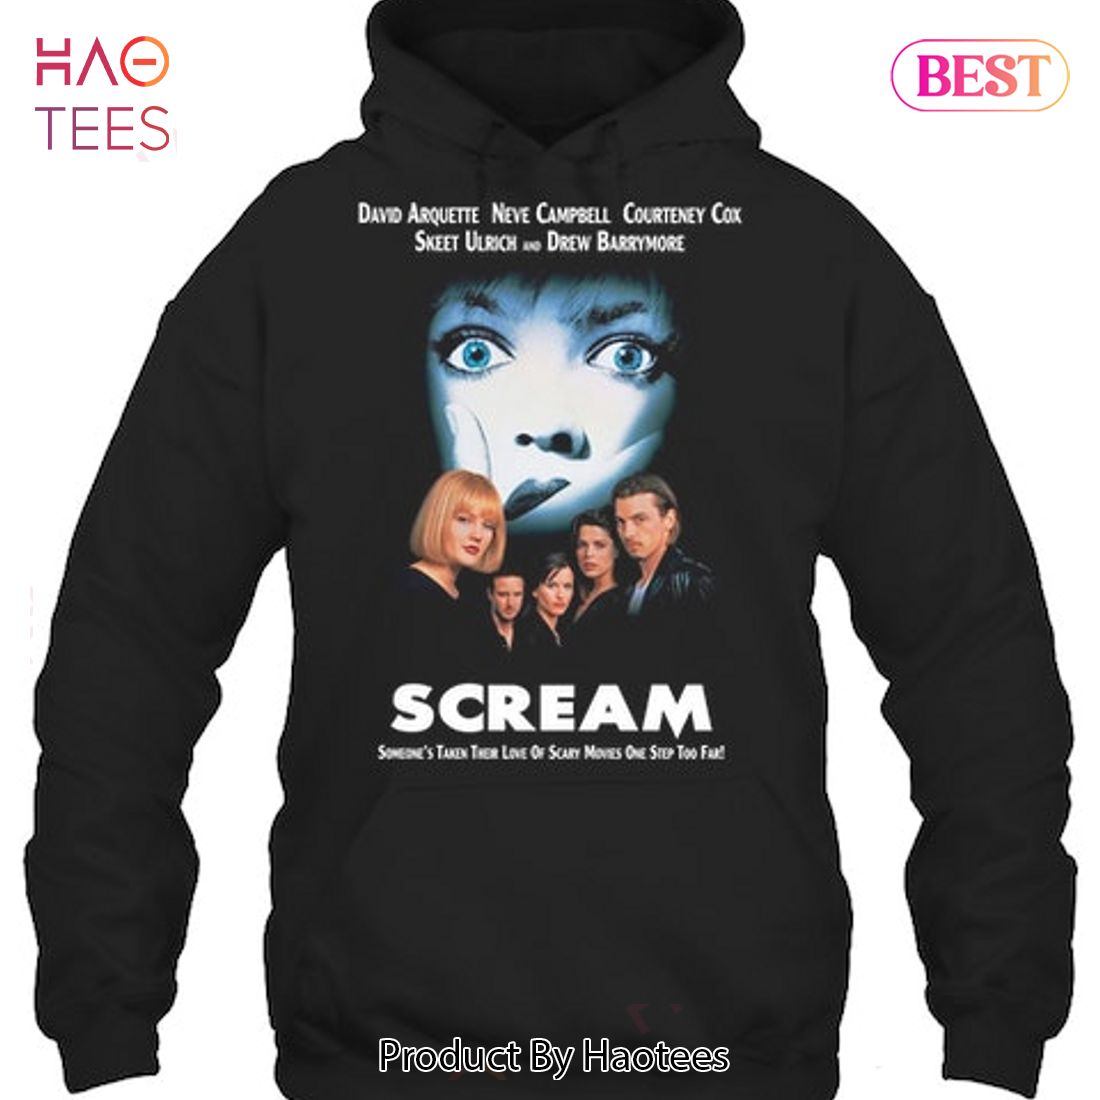 Scream Someone Taken Their Love Of Scary Movies One Step Too Far T-Shirt